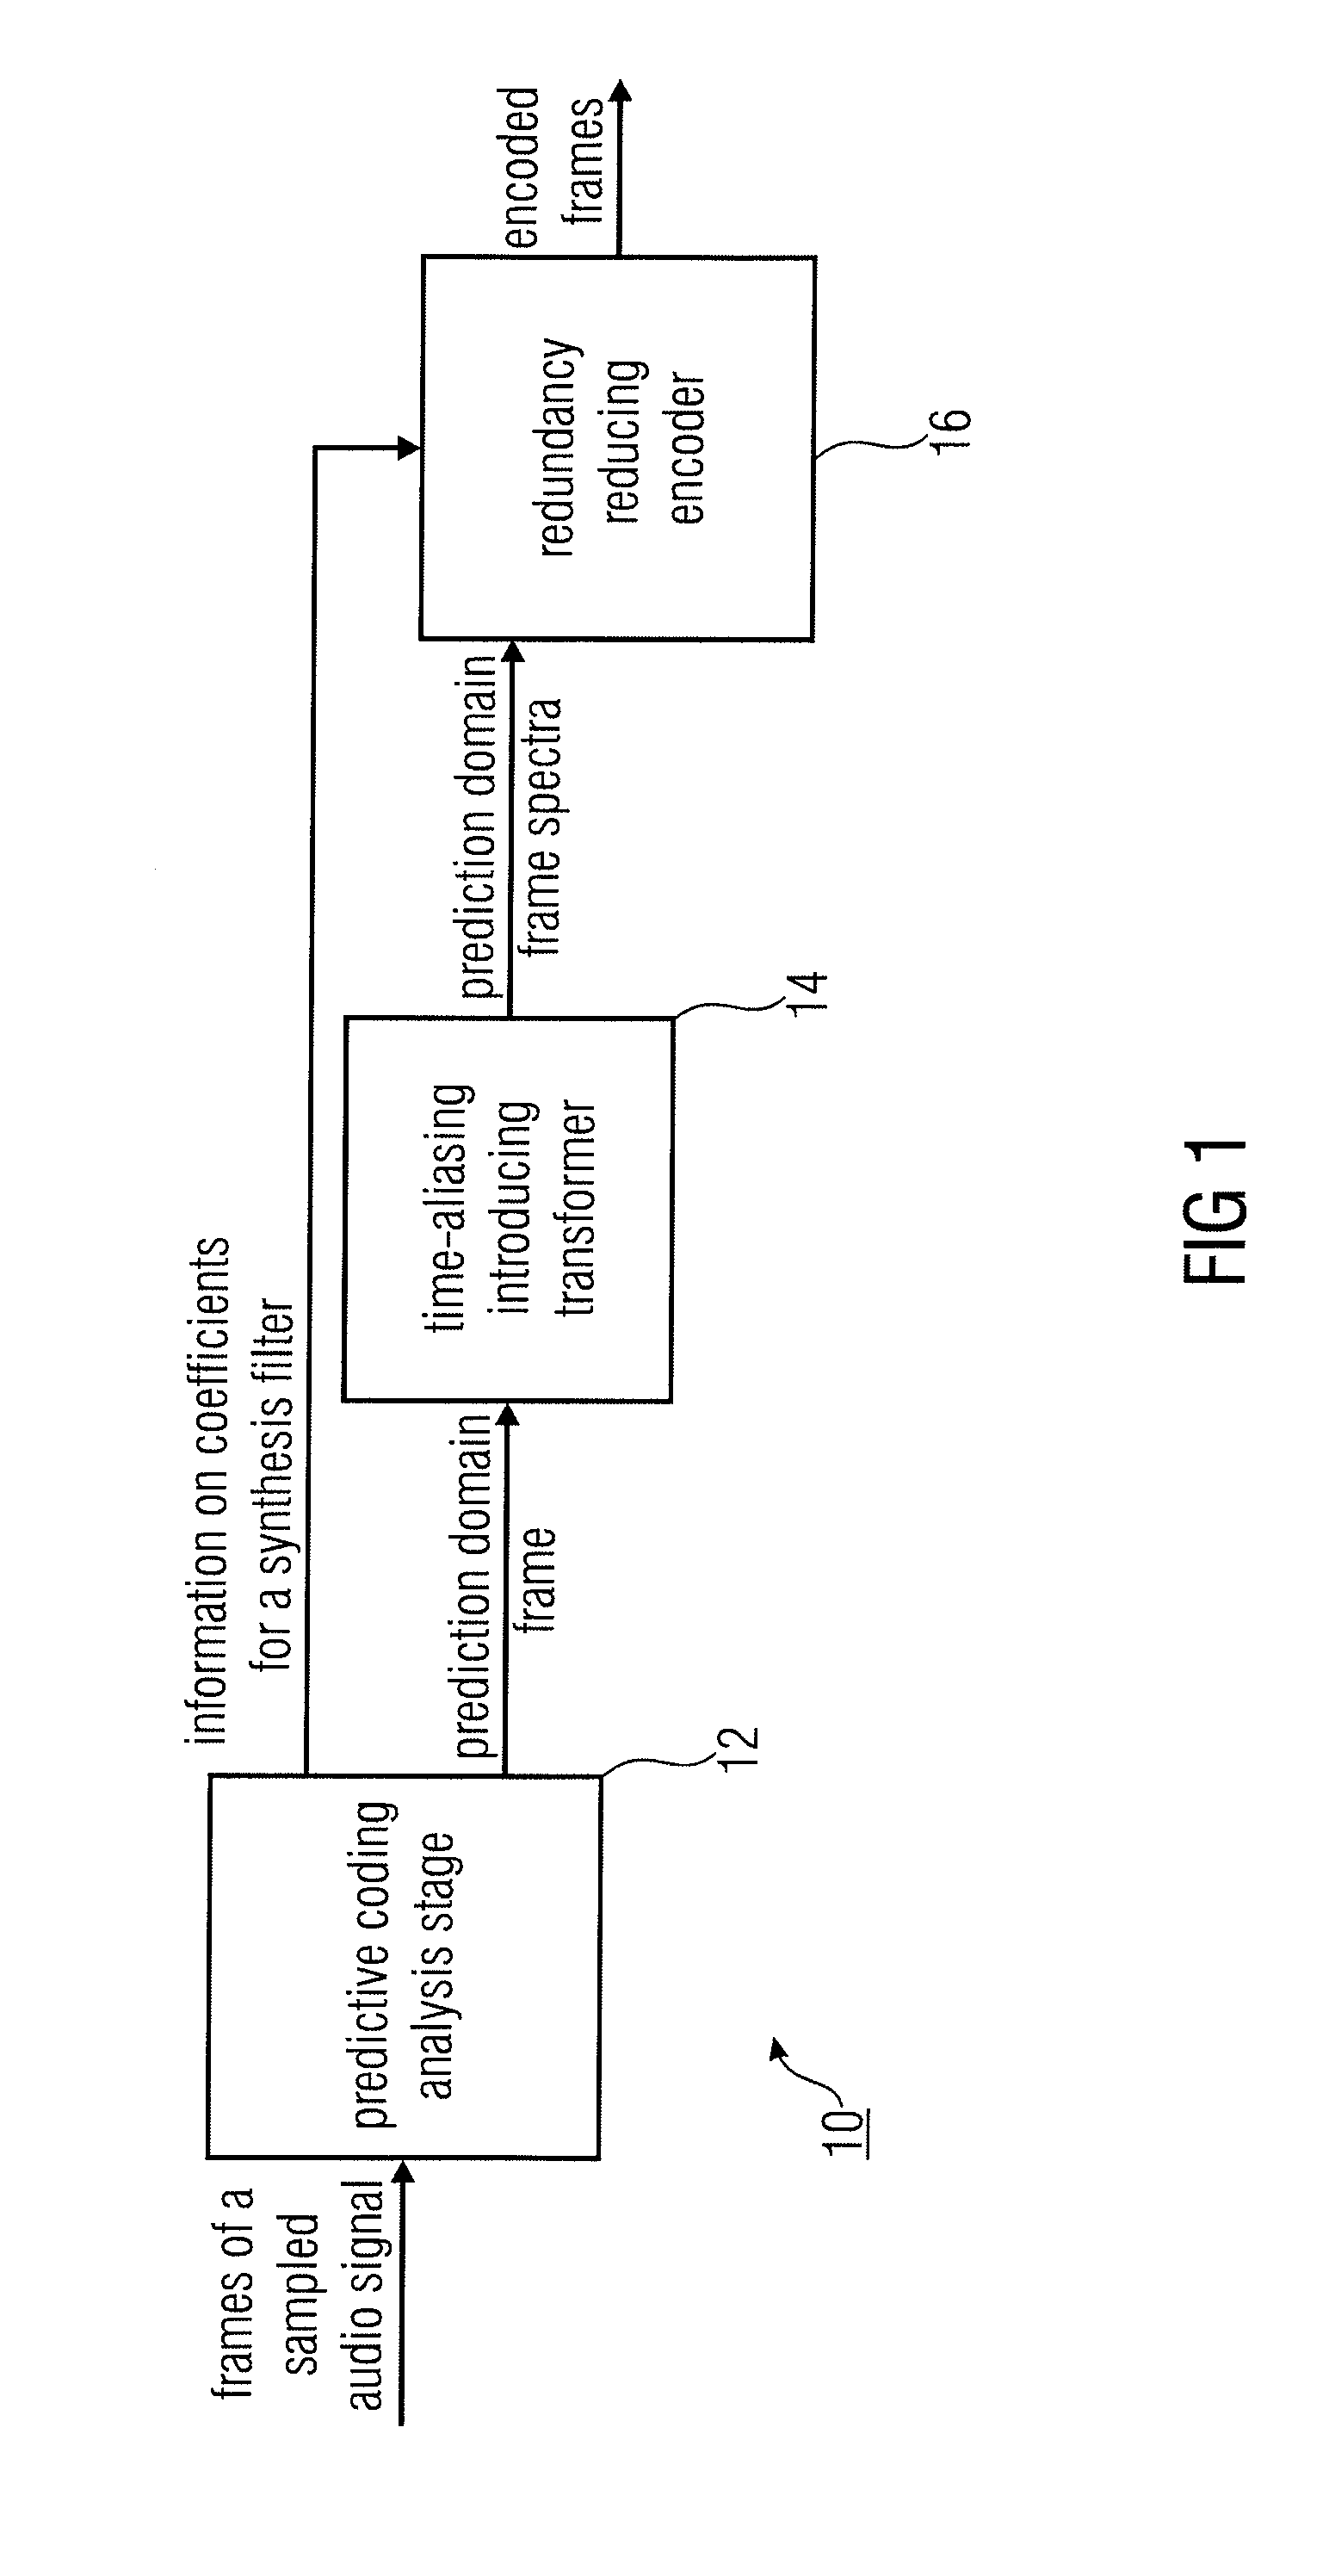 Audio Encoder and Decoder for Encoding and Decoding Frames of a Sampled Audio Signal